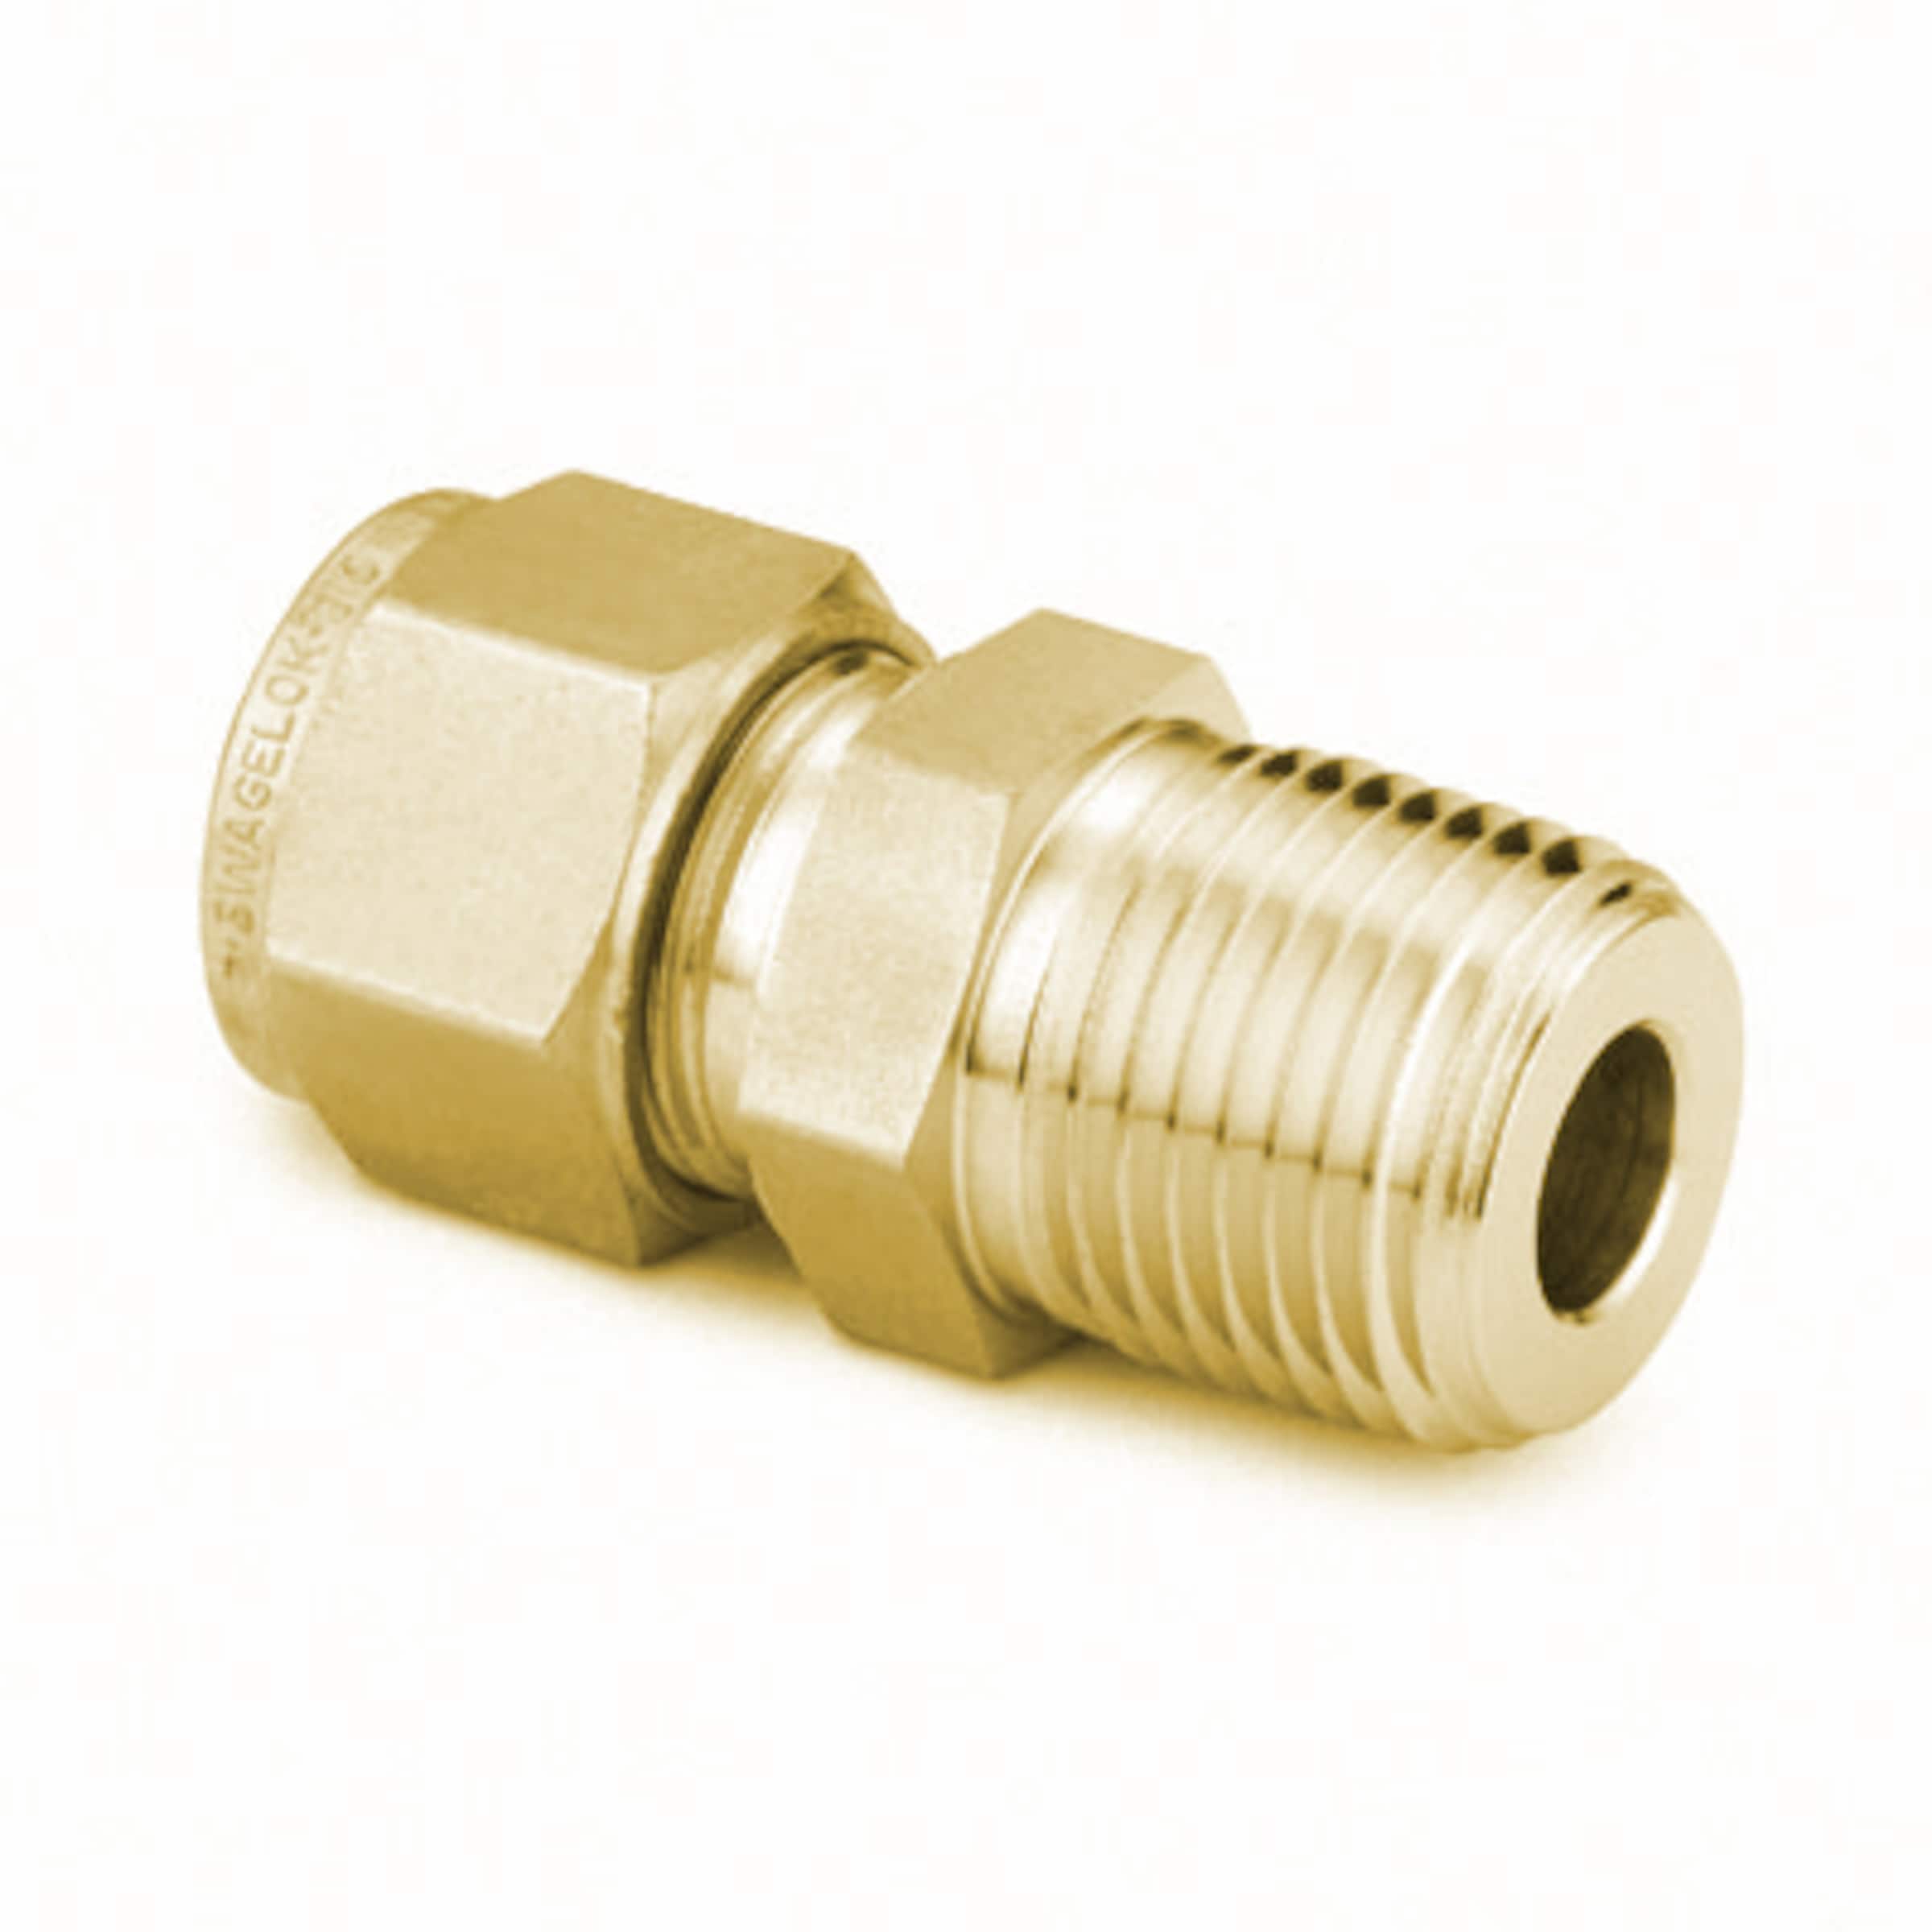 Brass Swagelok Tube Fitting, Male Connector, 10 mm Tube OD x 1/4 in. Male  NPT, Male Connectors, Tube Fittings and Adapters, Fittings, All  Products